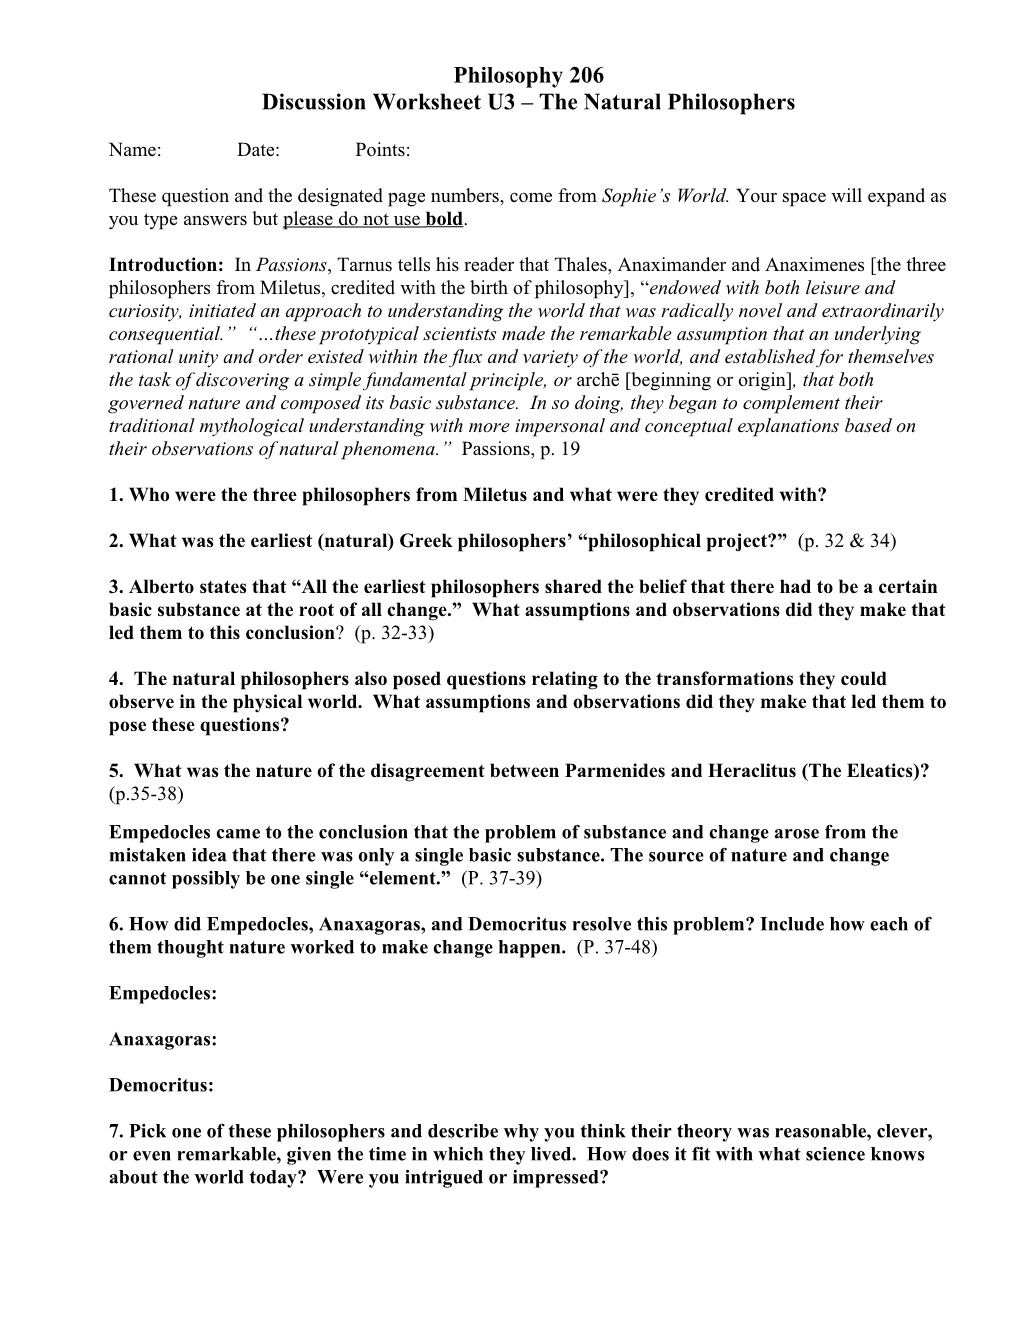 Discussion Worksheet U3 the Natural Philosophers